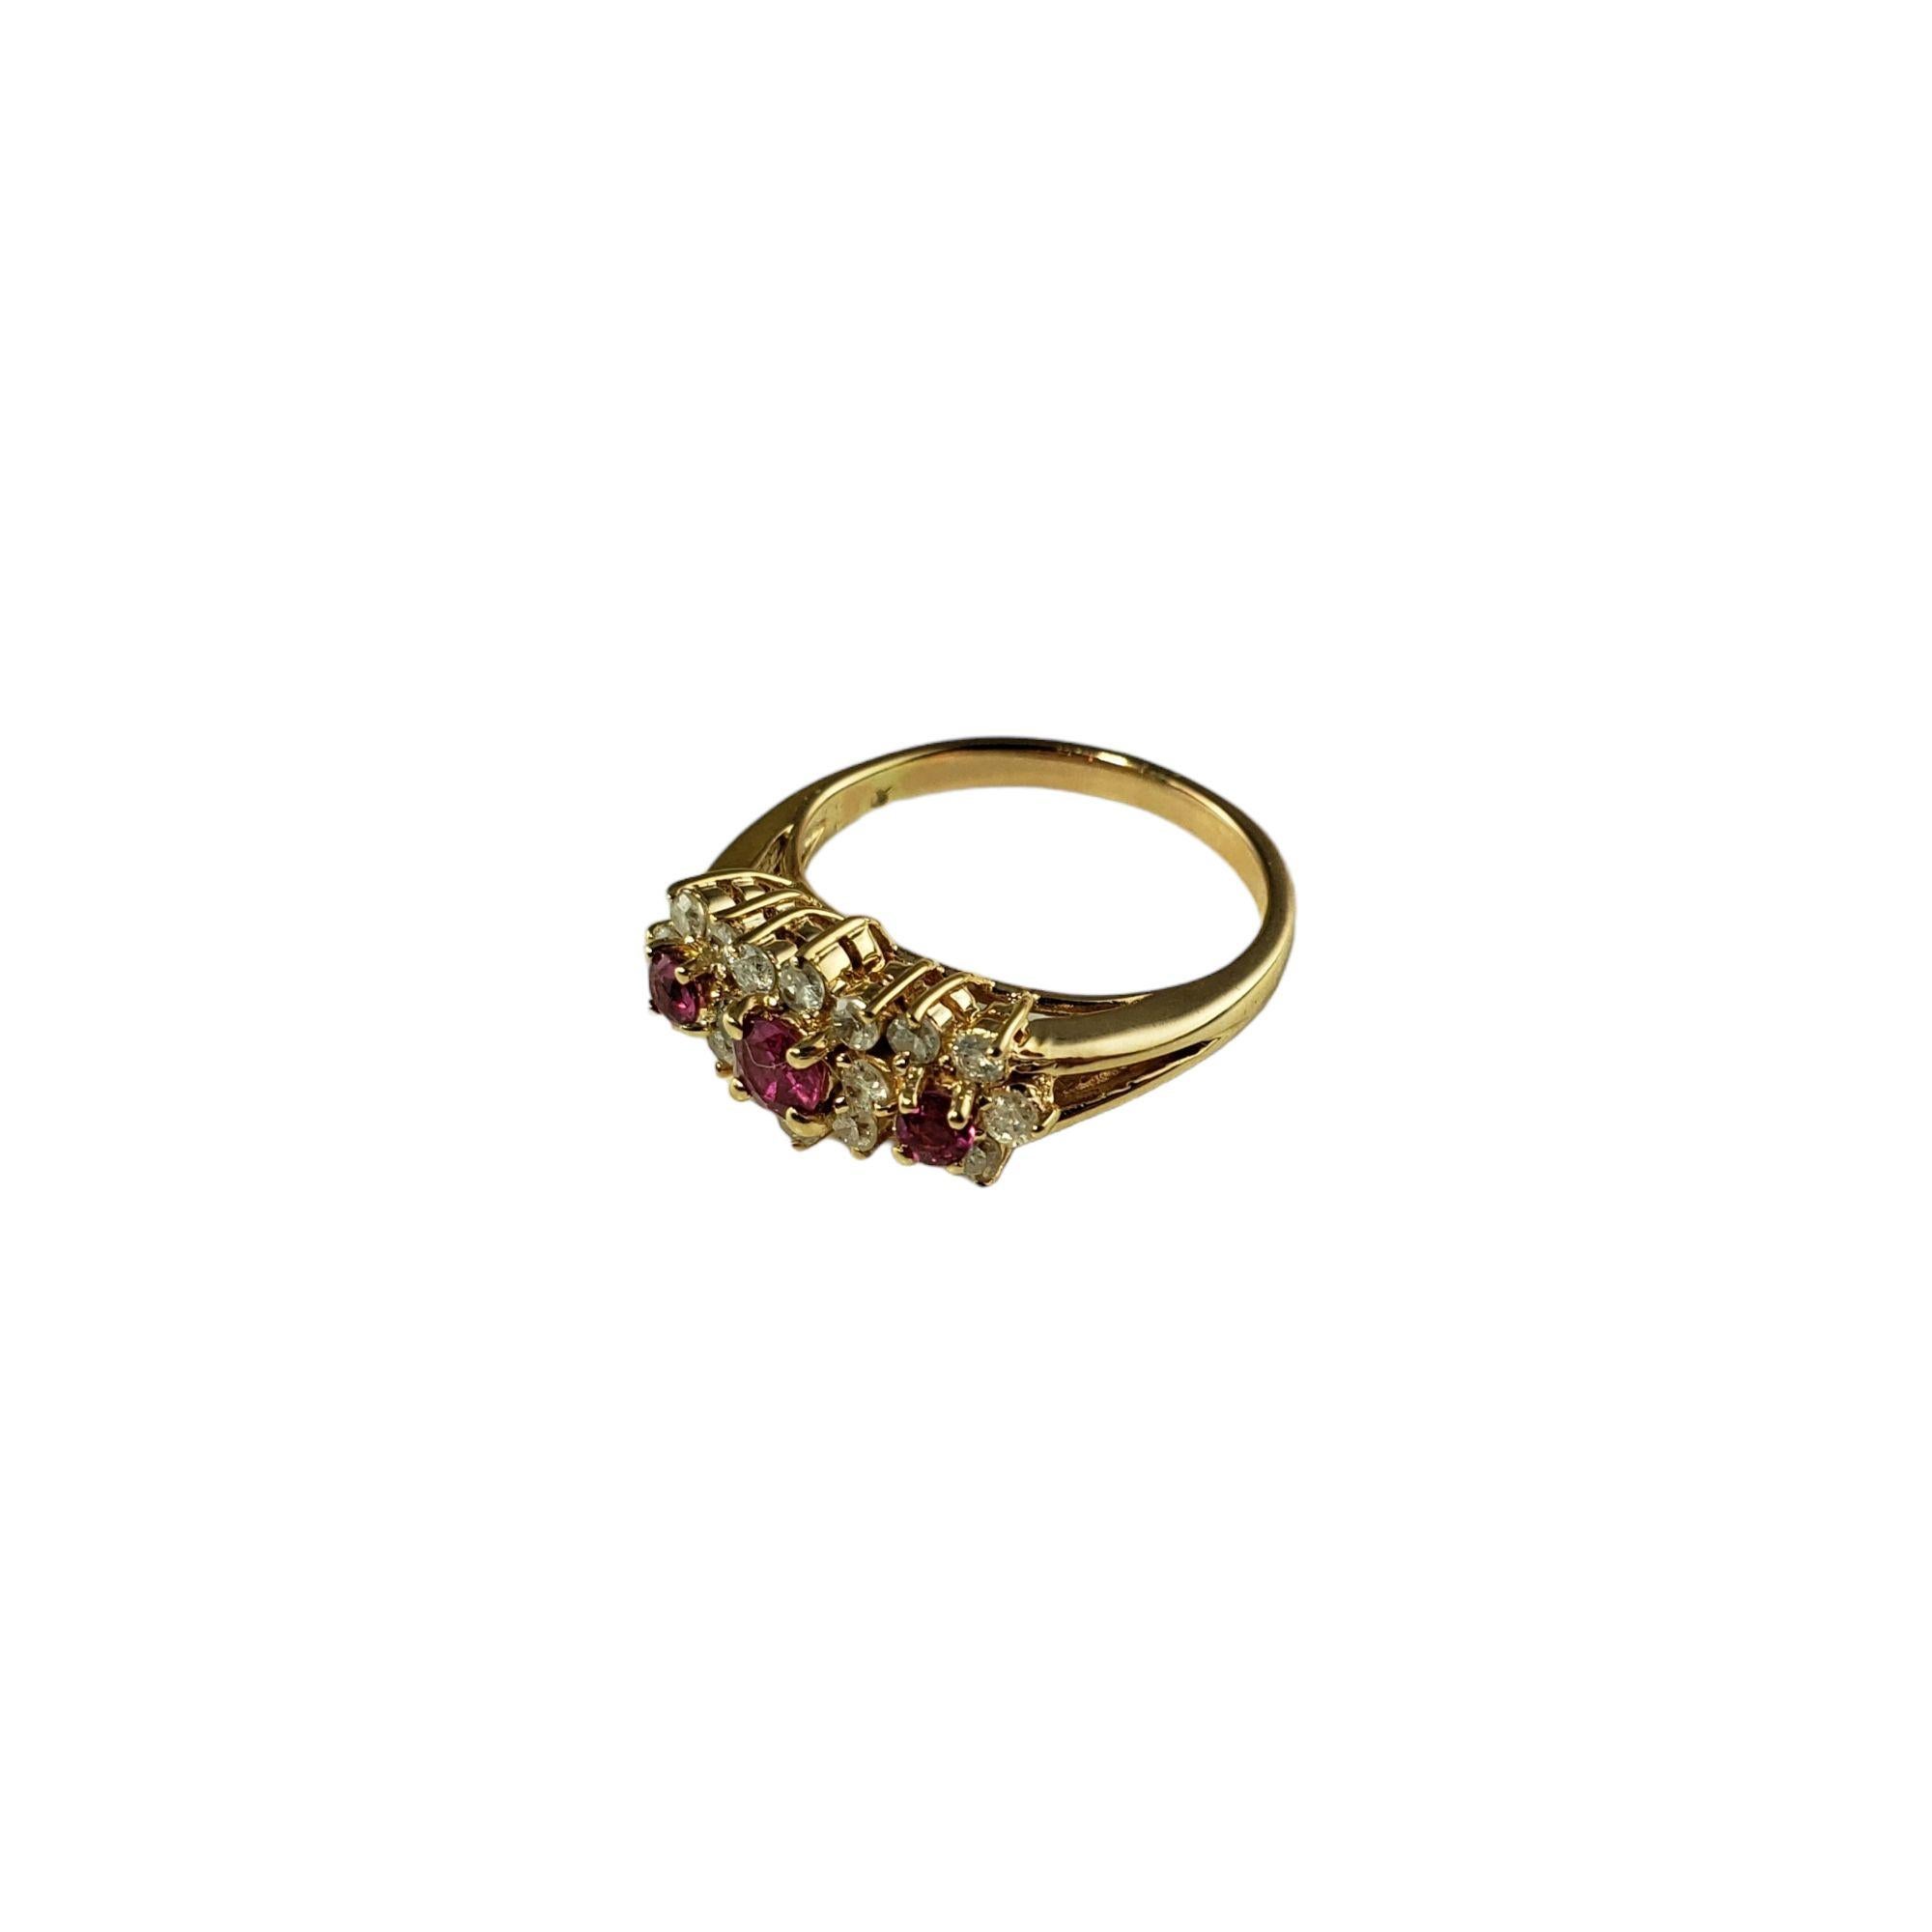 Vintage 14 Karat Yellow Gold Pink Sapphire and Diamond Ring Size 5.25 JAGi Certified-

This elegant ring features three round pink sapphires and 18 round brilliant cut diamonds set in classic 14K yellow gold. Width: 7 mm. Shank: 2 mm.

Total